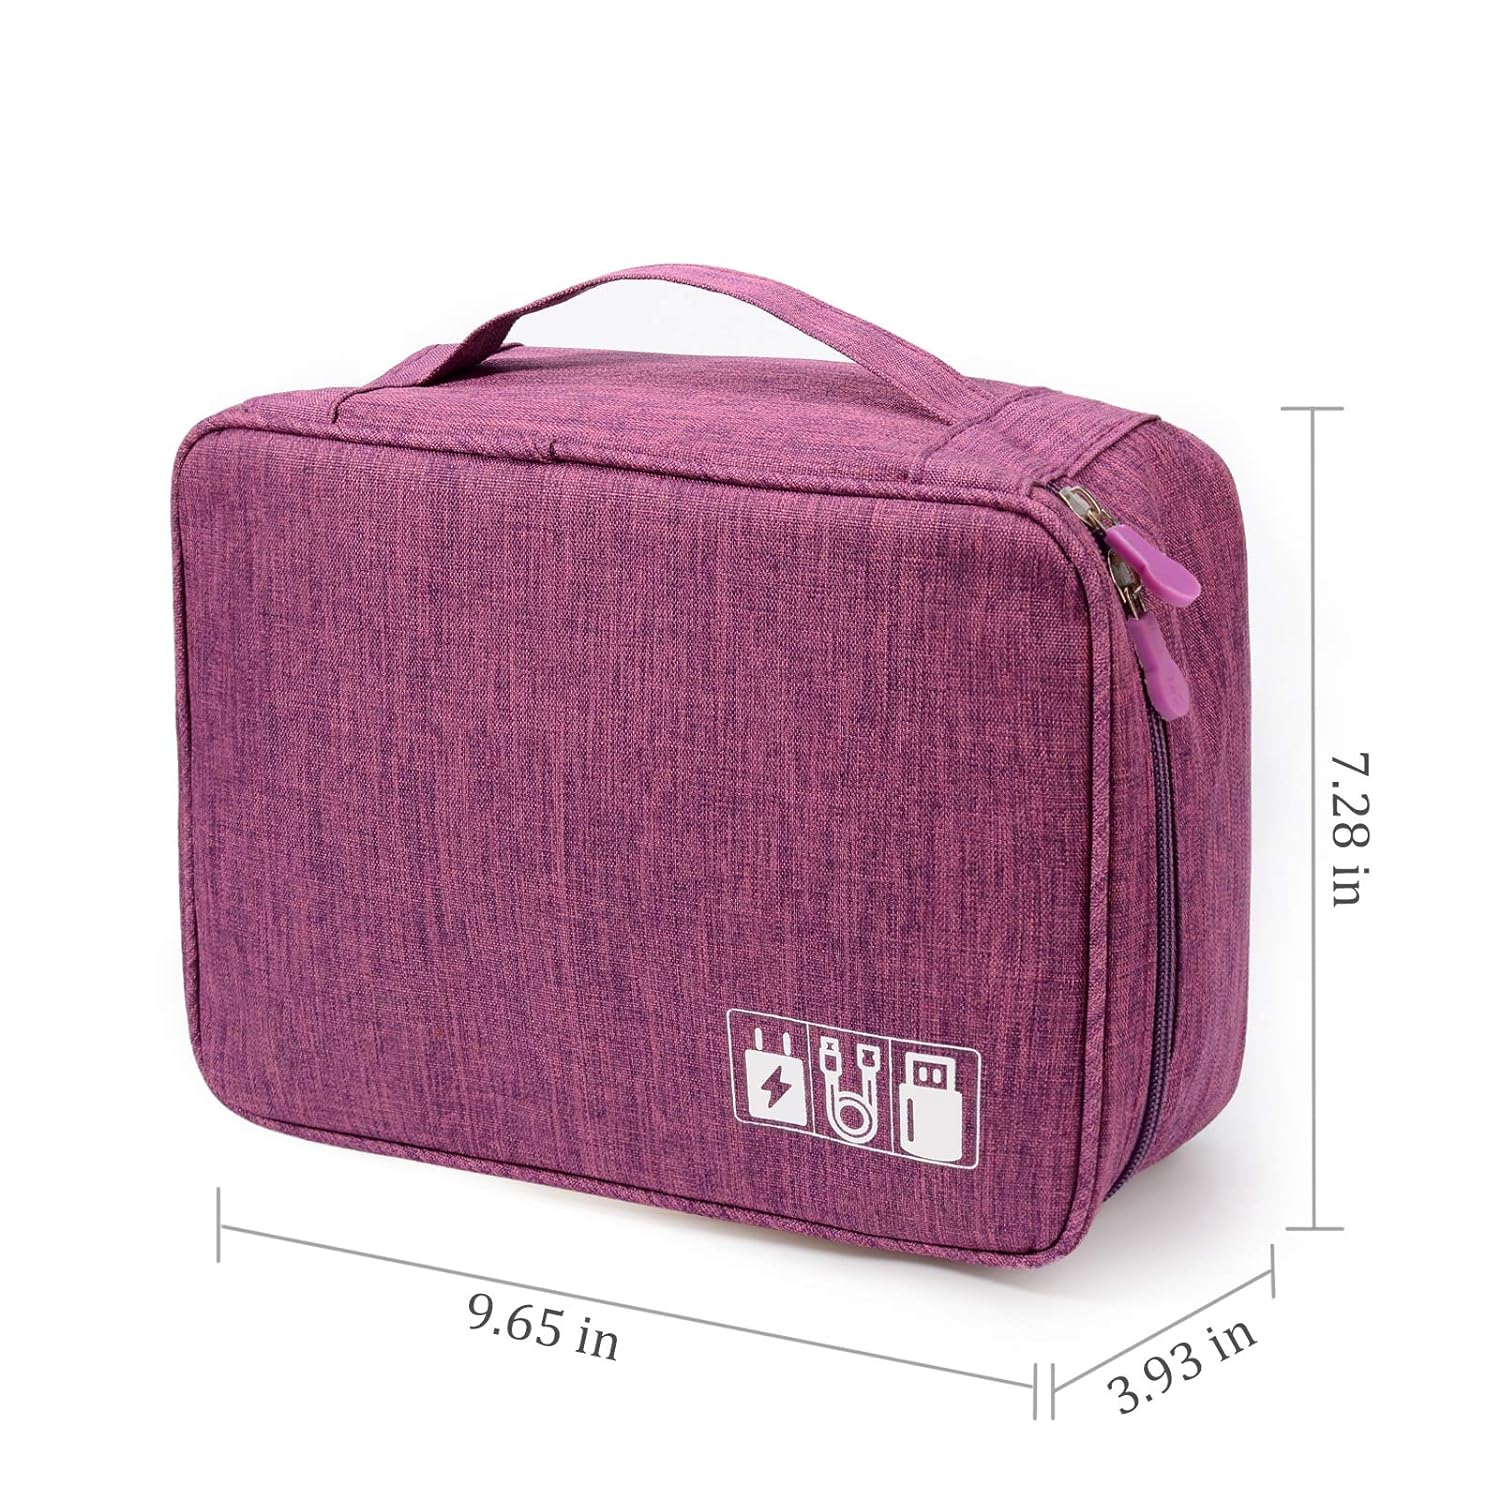 Electronic Organizer Travel Universal Cable Organizer Electronics Accessories Storage Bag Gadget Gear Cases for iPad Mini, Kindle, Smartphone, Cable, Charger, Power Bank, USB, SD Card (Purple)